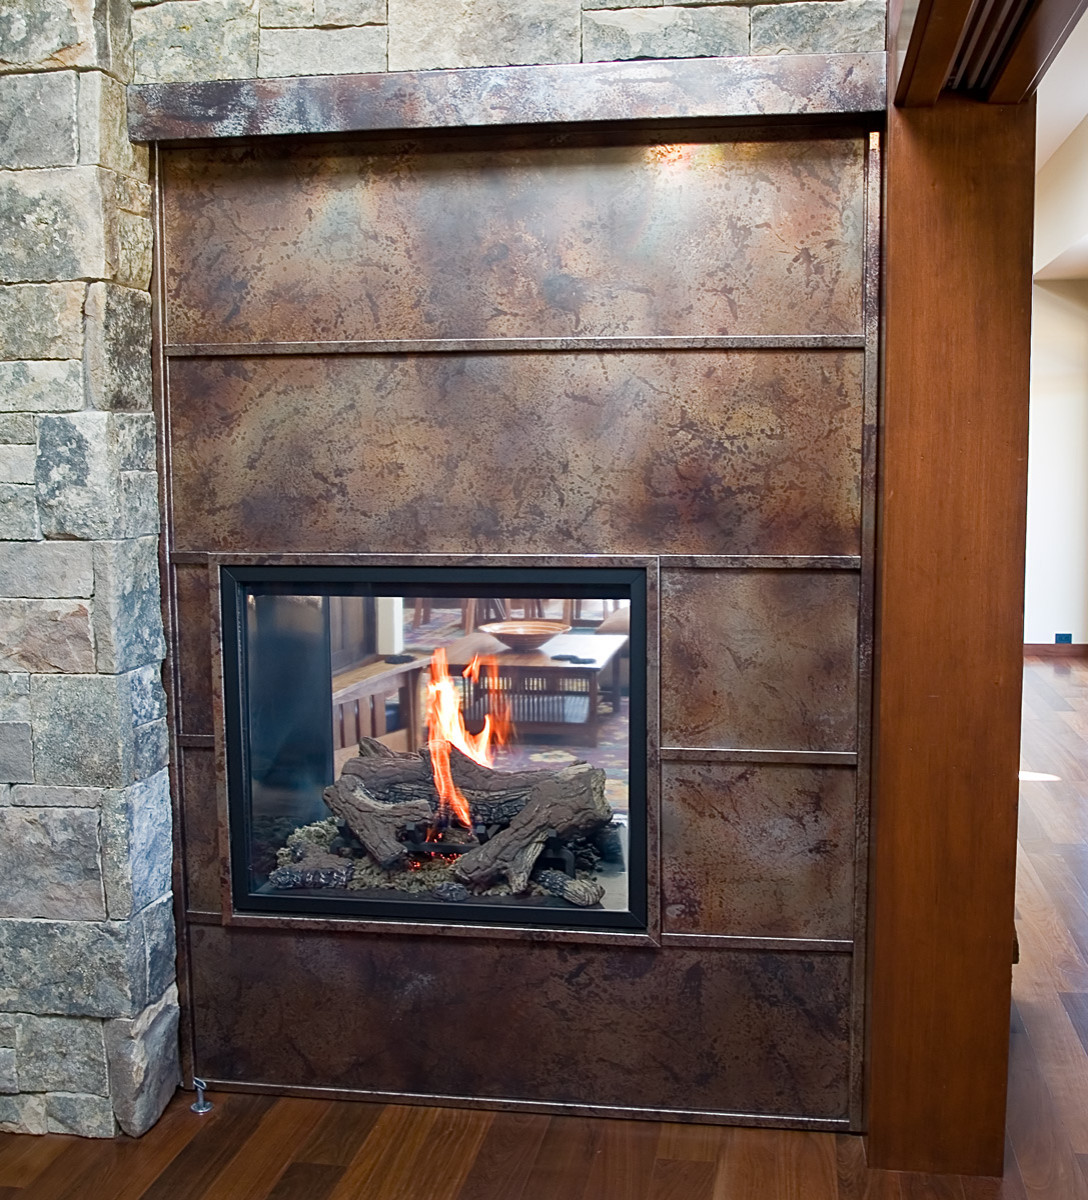 Volcanic Stainless Steel Fireplace, How To Tile A Metal Fireplace Surround